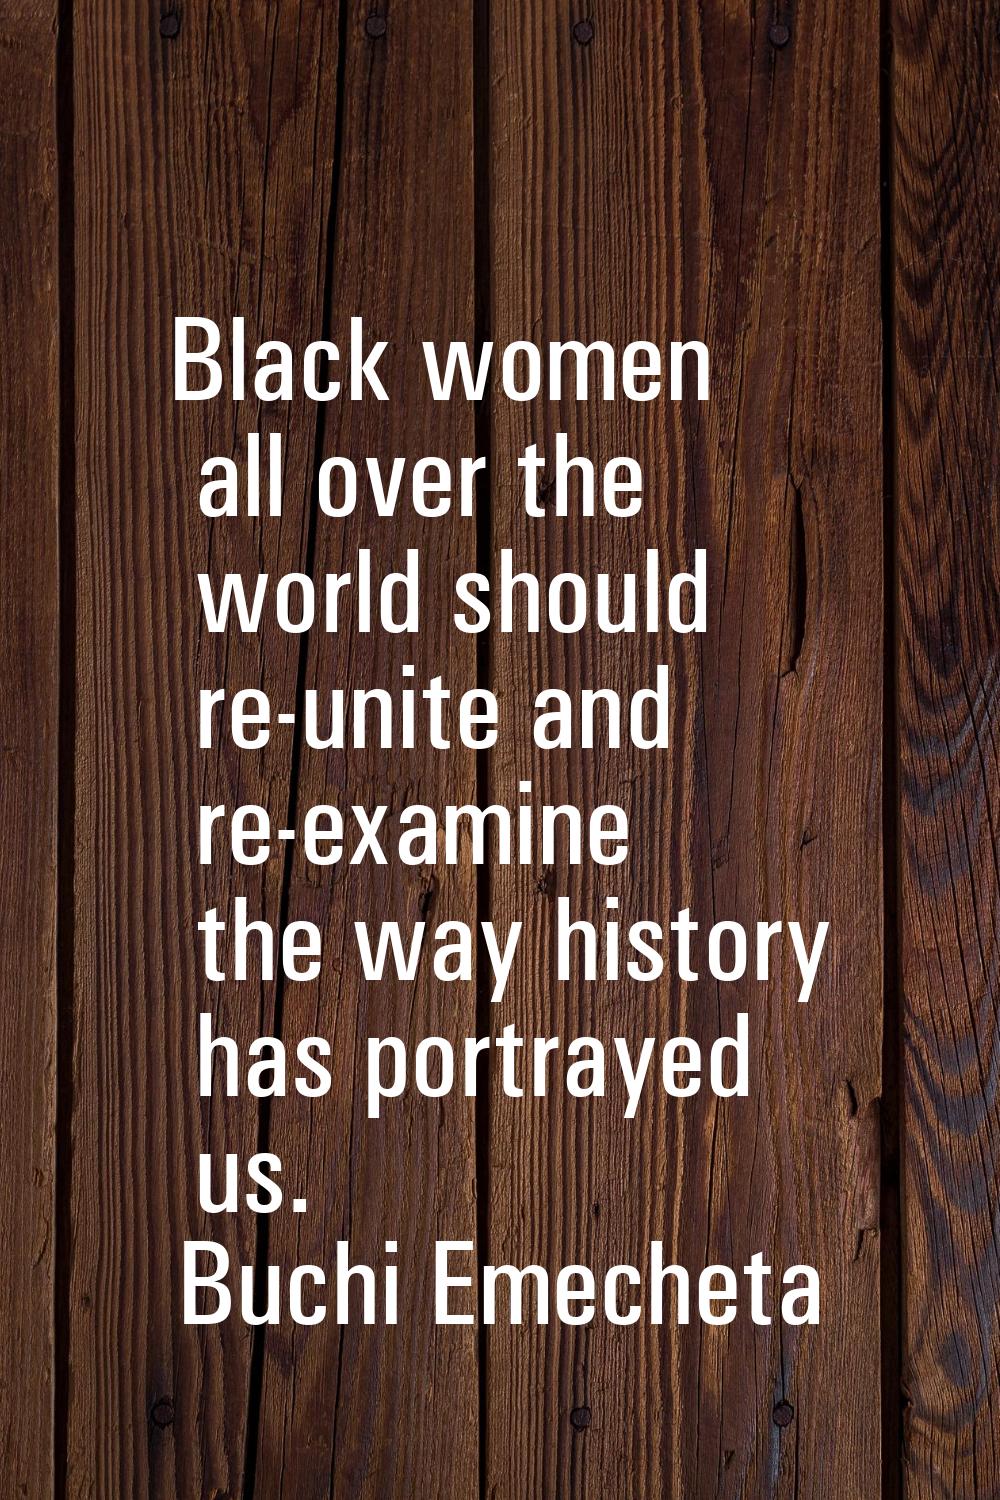 Black women all over the world should re-unite and re-examine the way history has portrayed us.